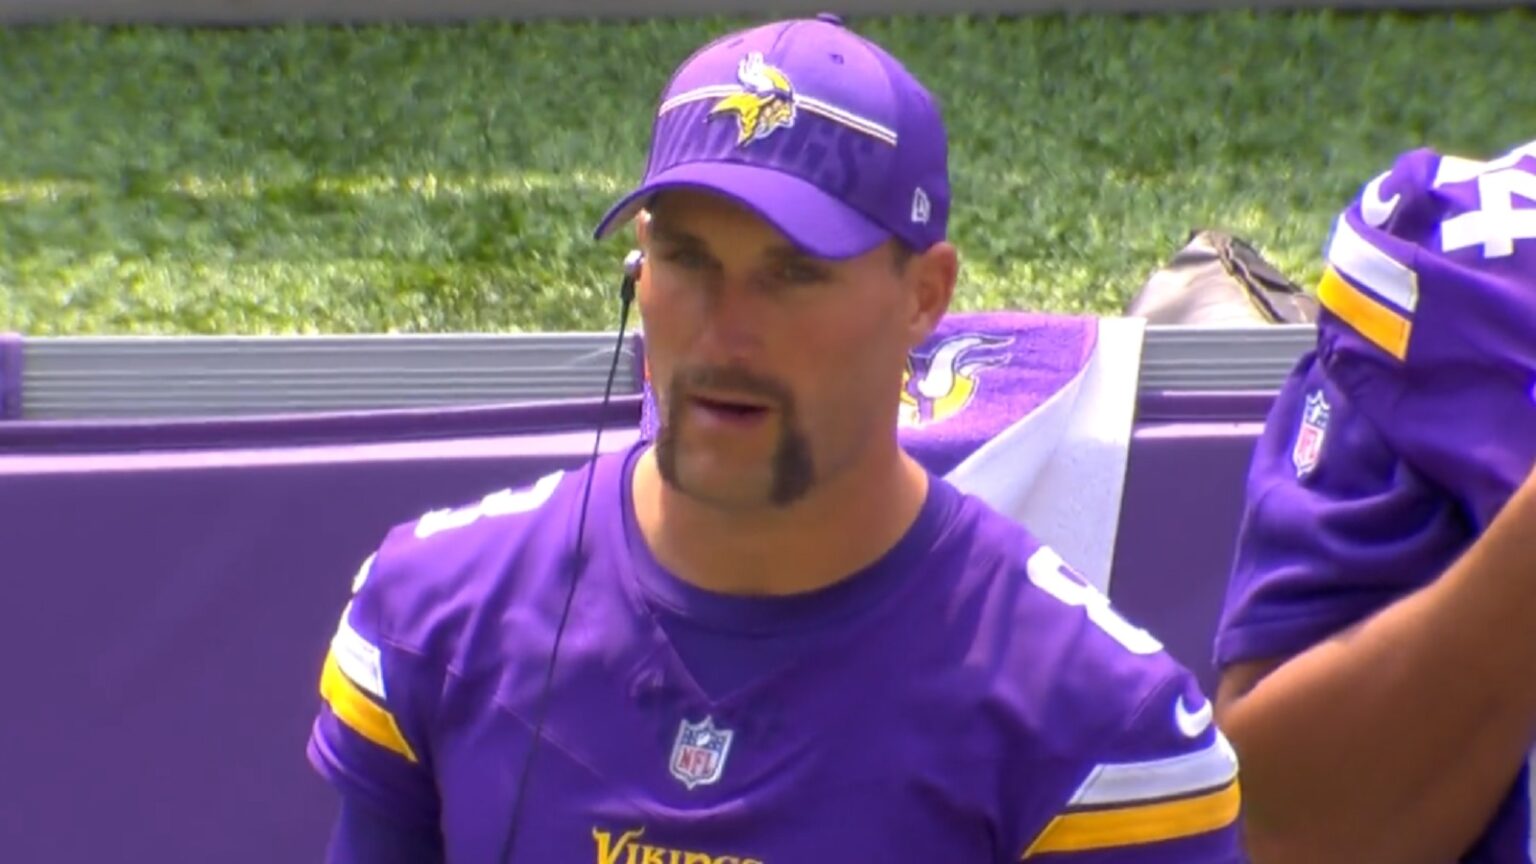 Everyone said the same thing about Kirk Cousins' new look